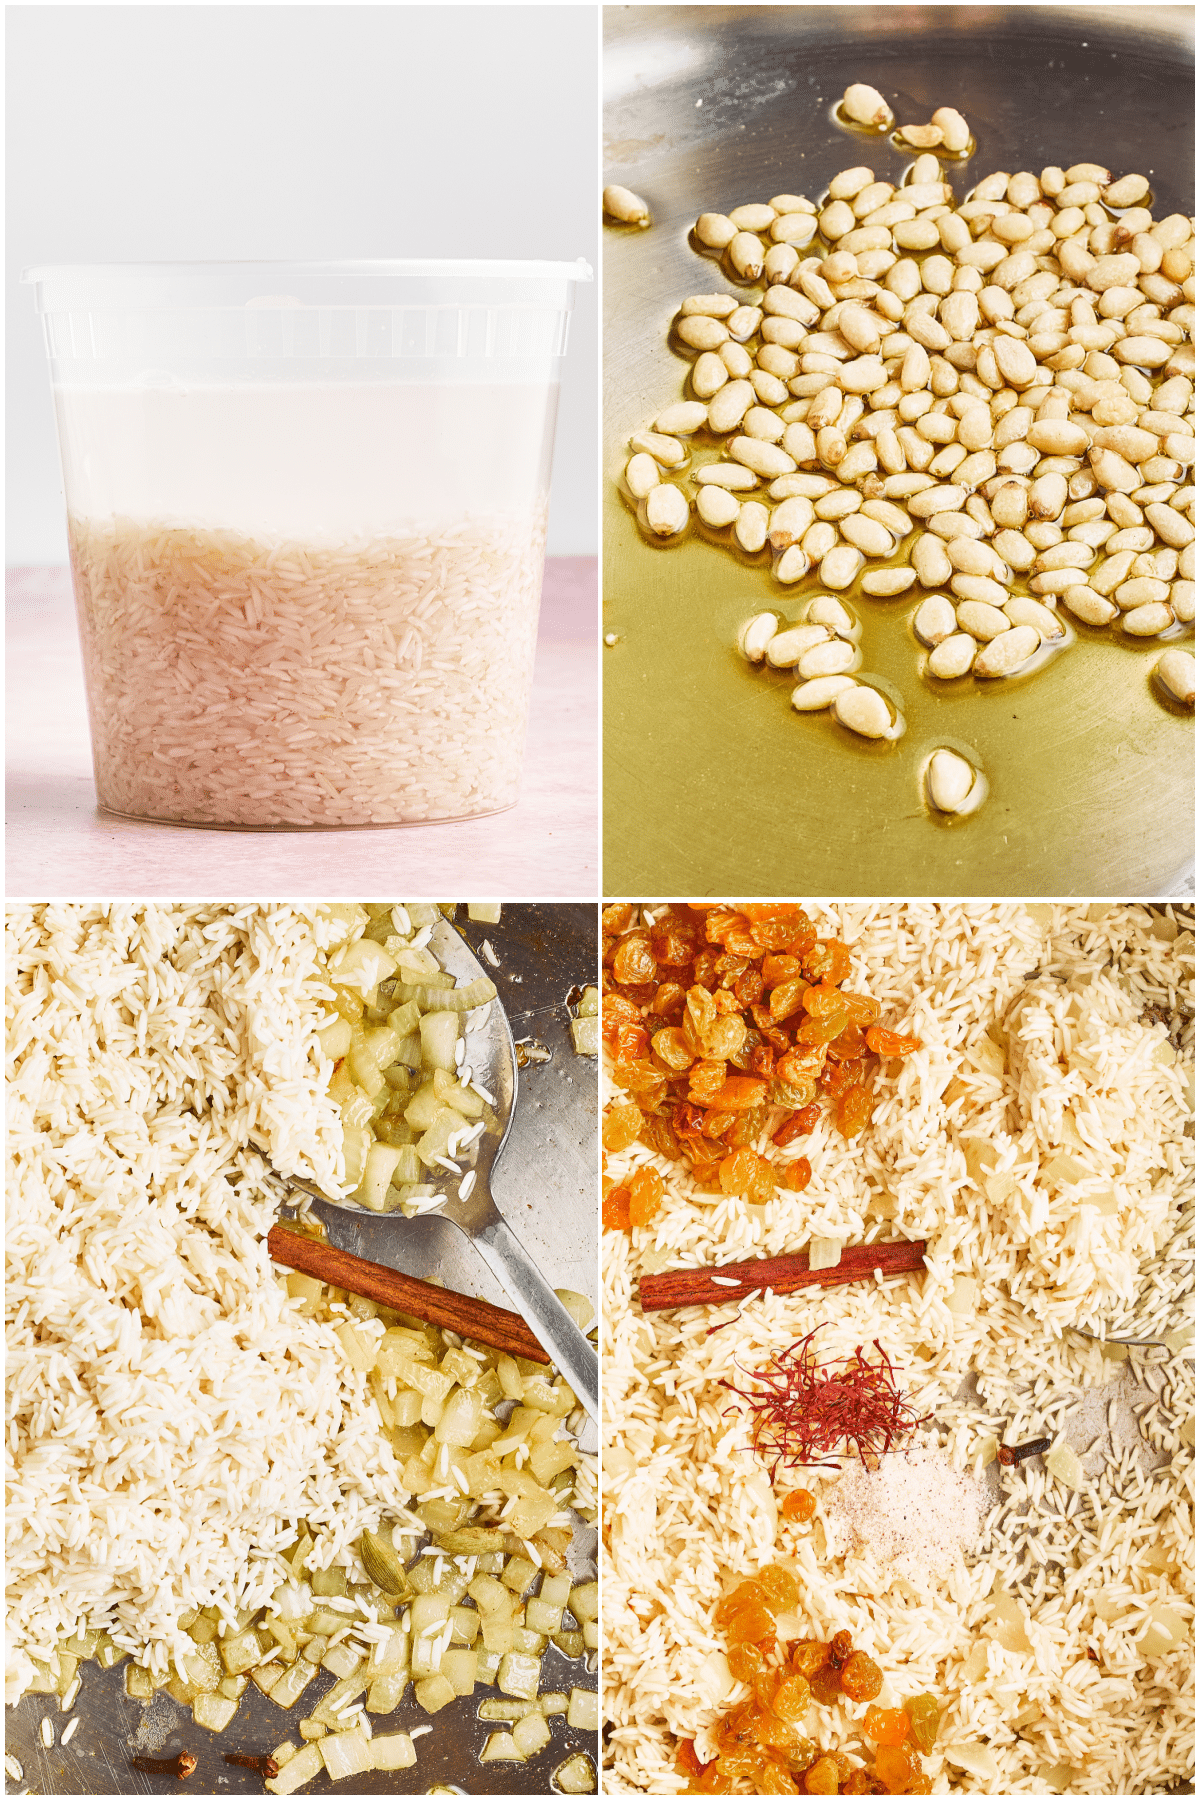 A four image collage showing how to make saffron rice: soak the rice, toast the pine nuts in olive oil, sauté the onion, add the rice, sultanas, and spices.